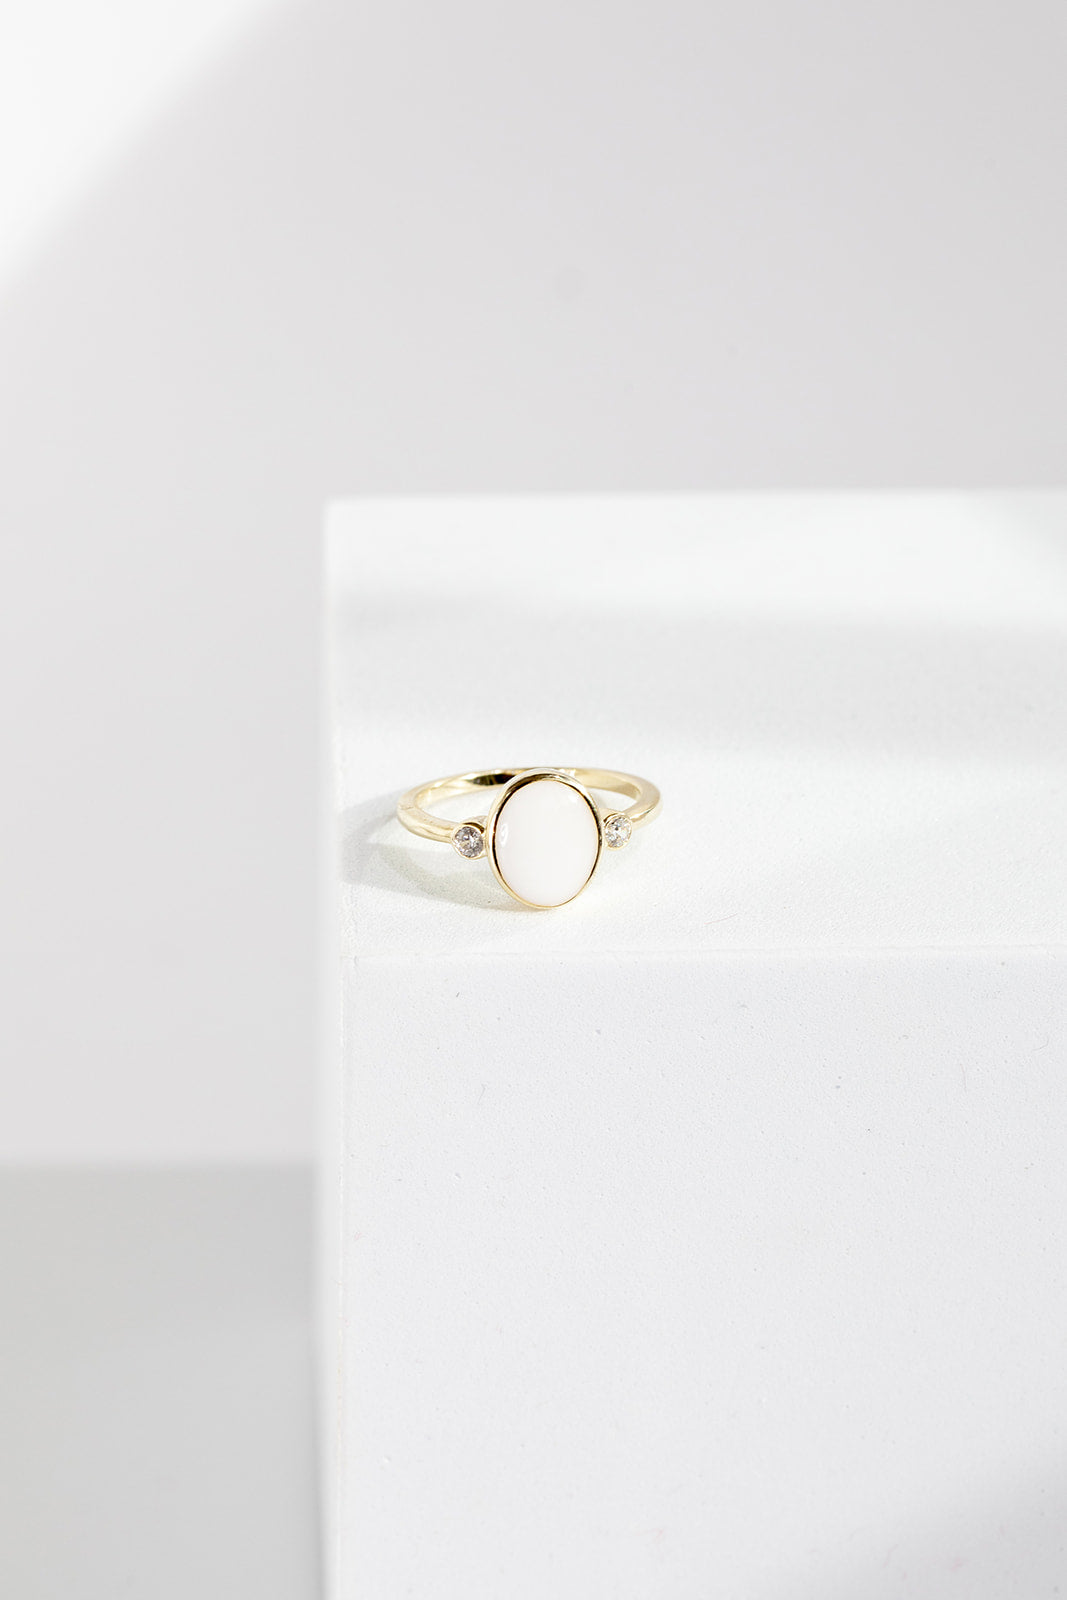 Breastmilk Oval Stacker Ring Set - 9ct Gold